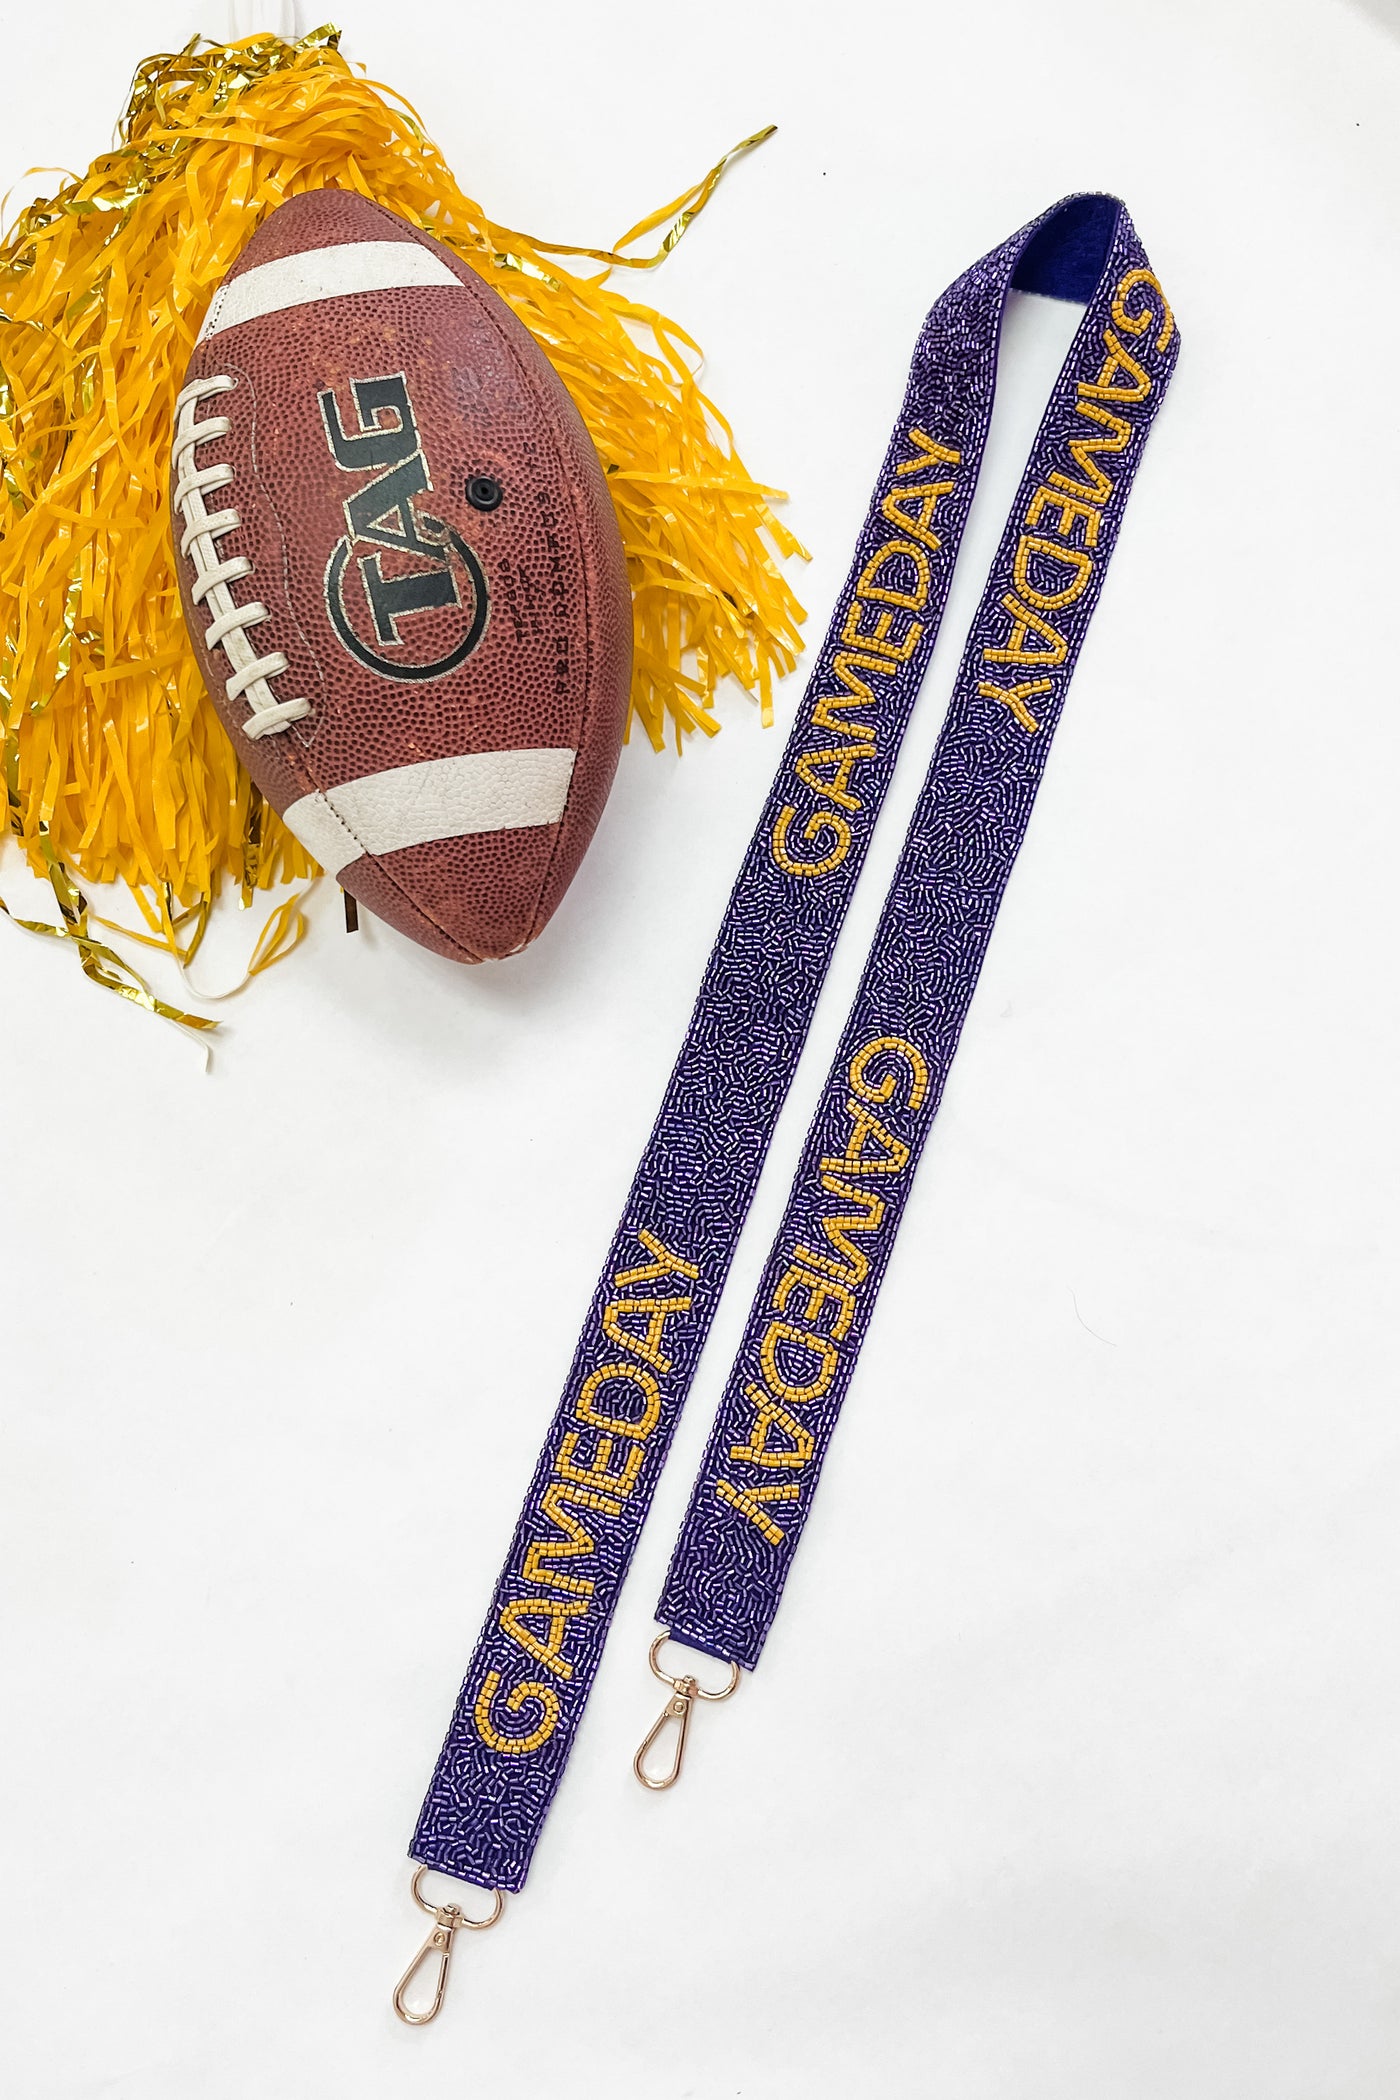 Rep Your College "Game Day" Bag Strap